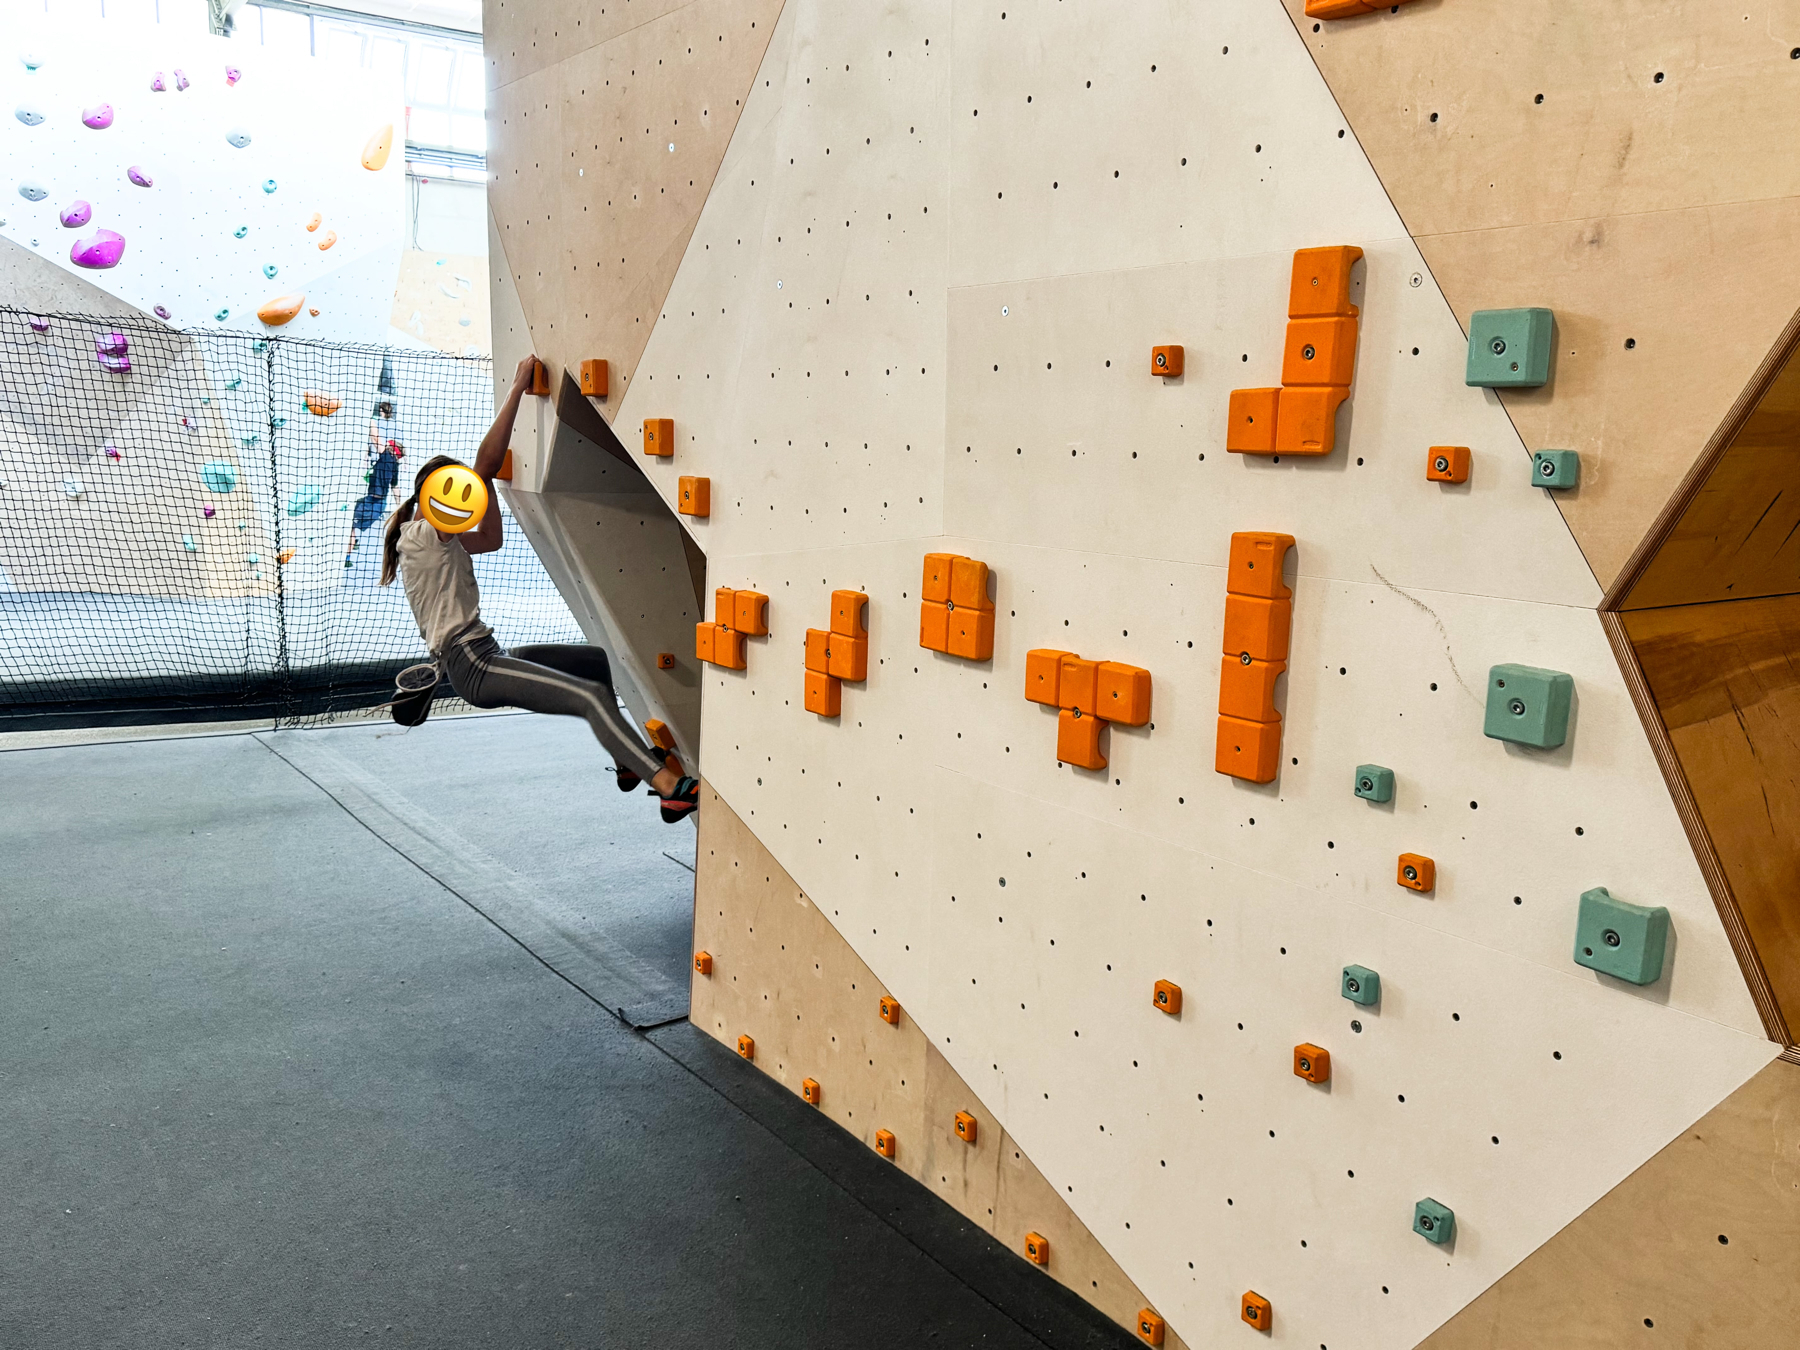 A person wearing climbing shoes is bouldering on an indoor climbing wall with orange and green holds. The climbing facility features padded flooring and additional climbing walls in the background. The climber’s face is covered with a smiley face emoji